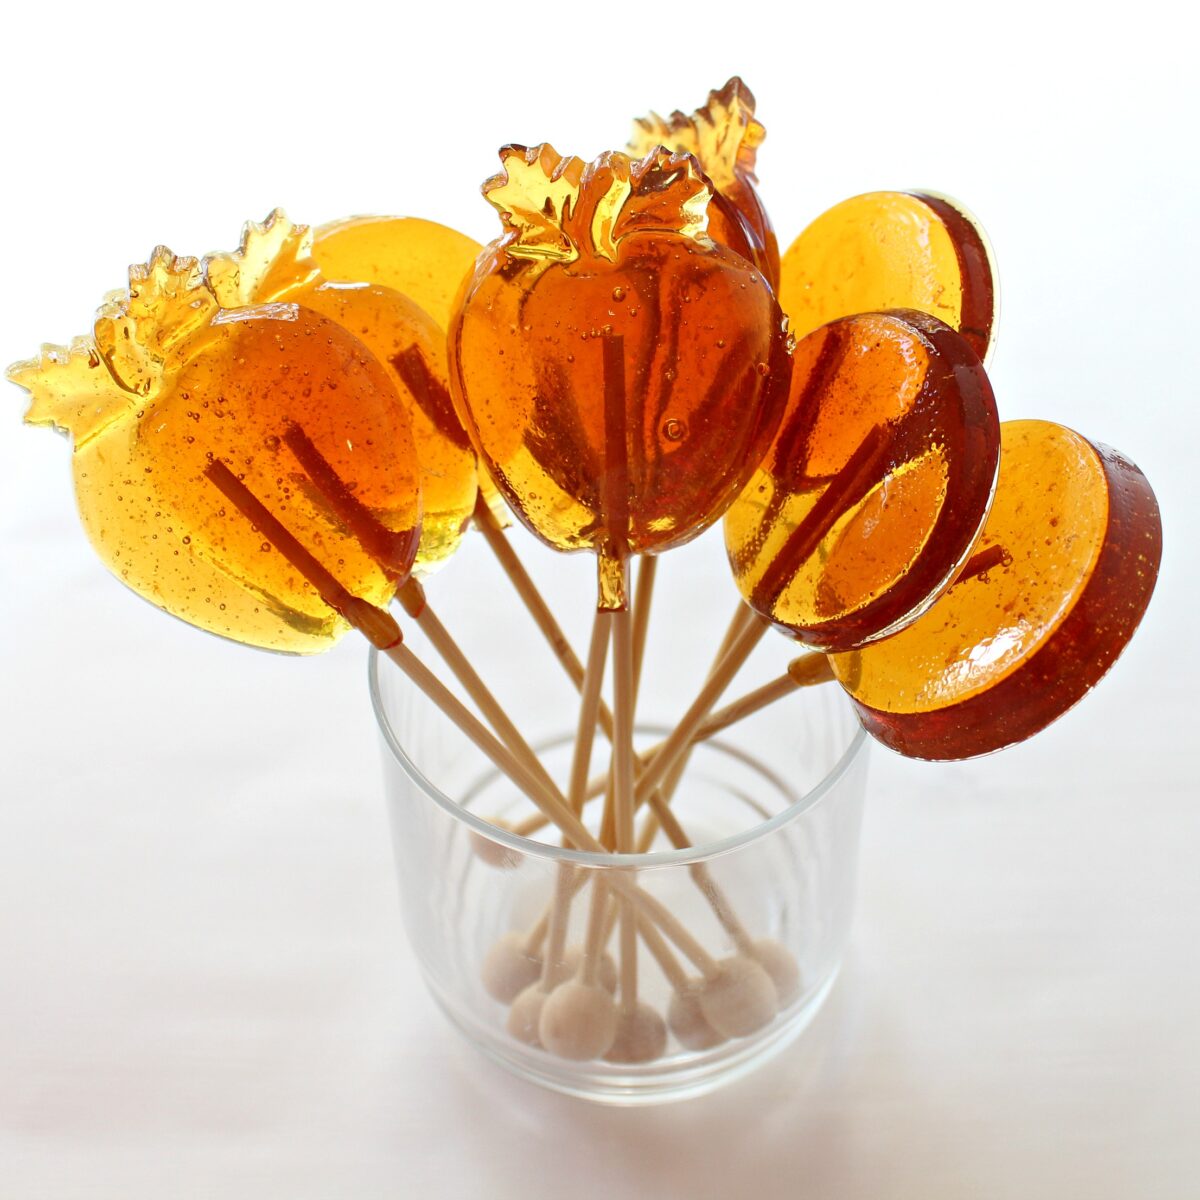 Apple and circle lollipops with wooden sticks in a clear glass.